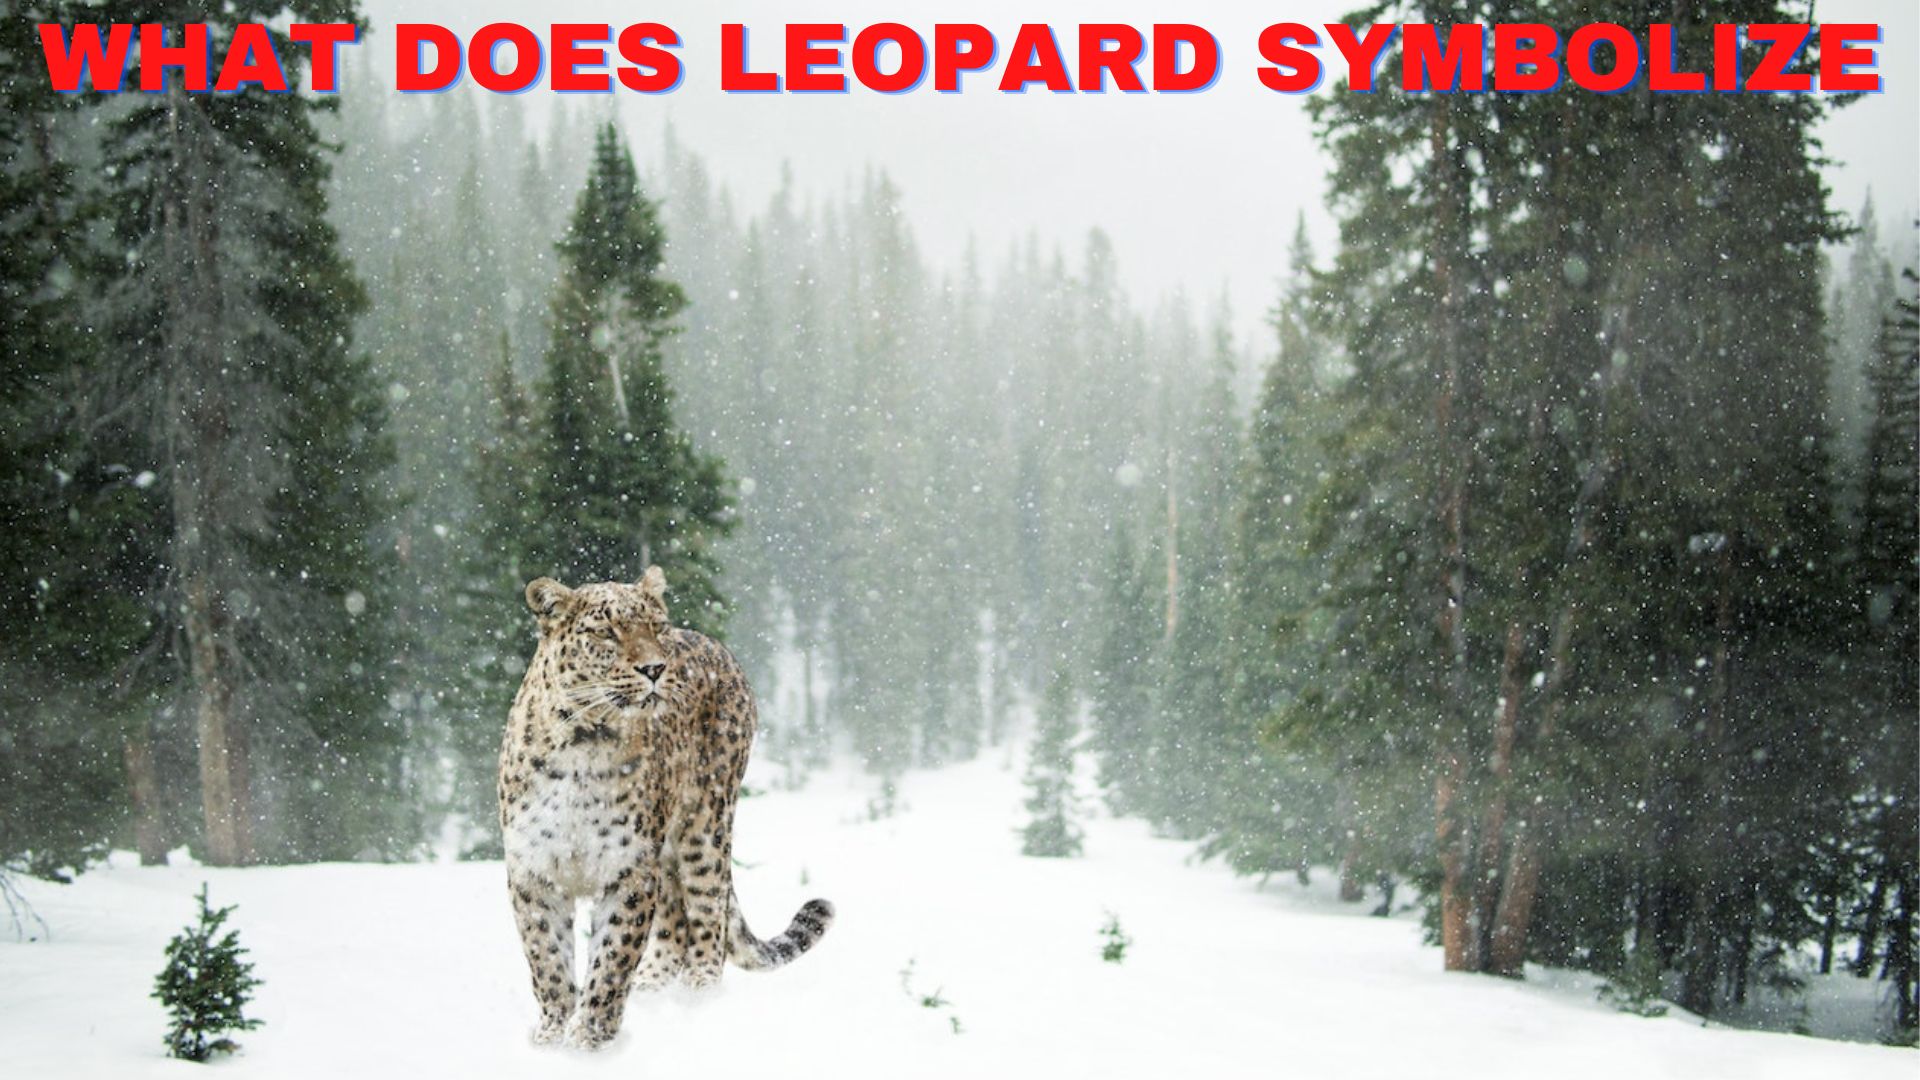 What Does Leopard Symbolize? Symbols Of Stubbornness, Protection, Confidence And Leadership